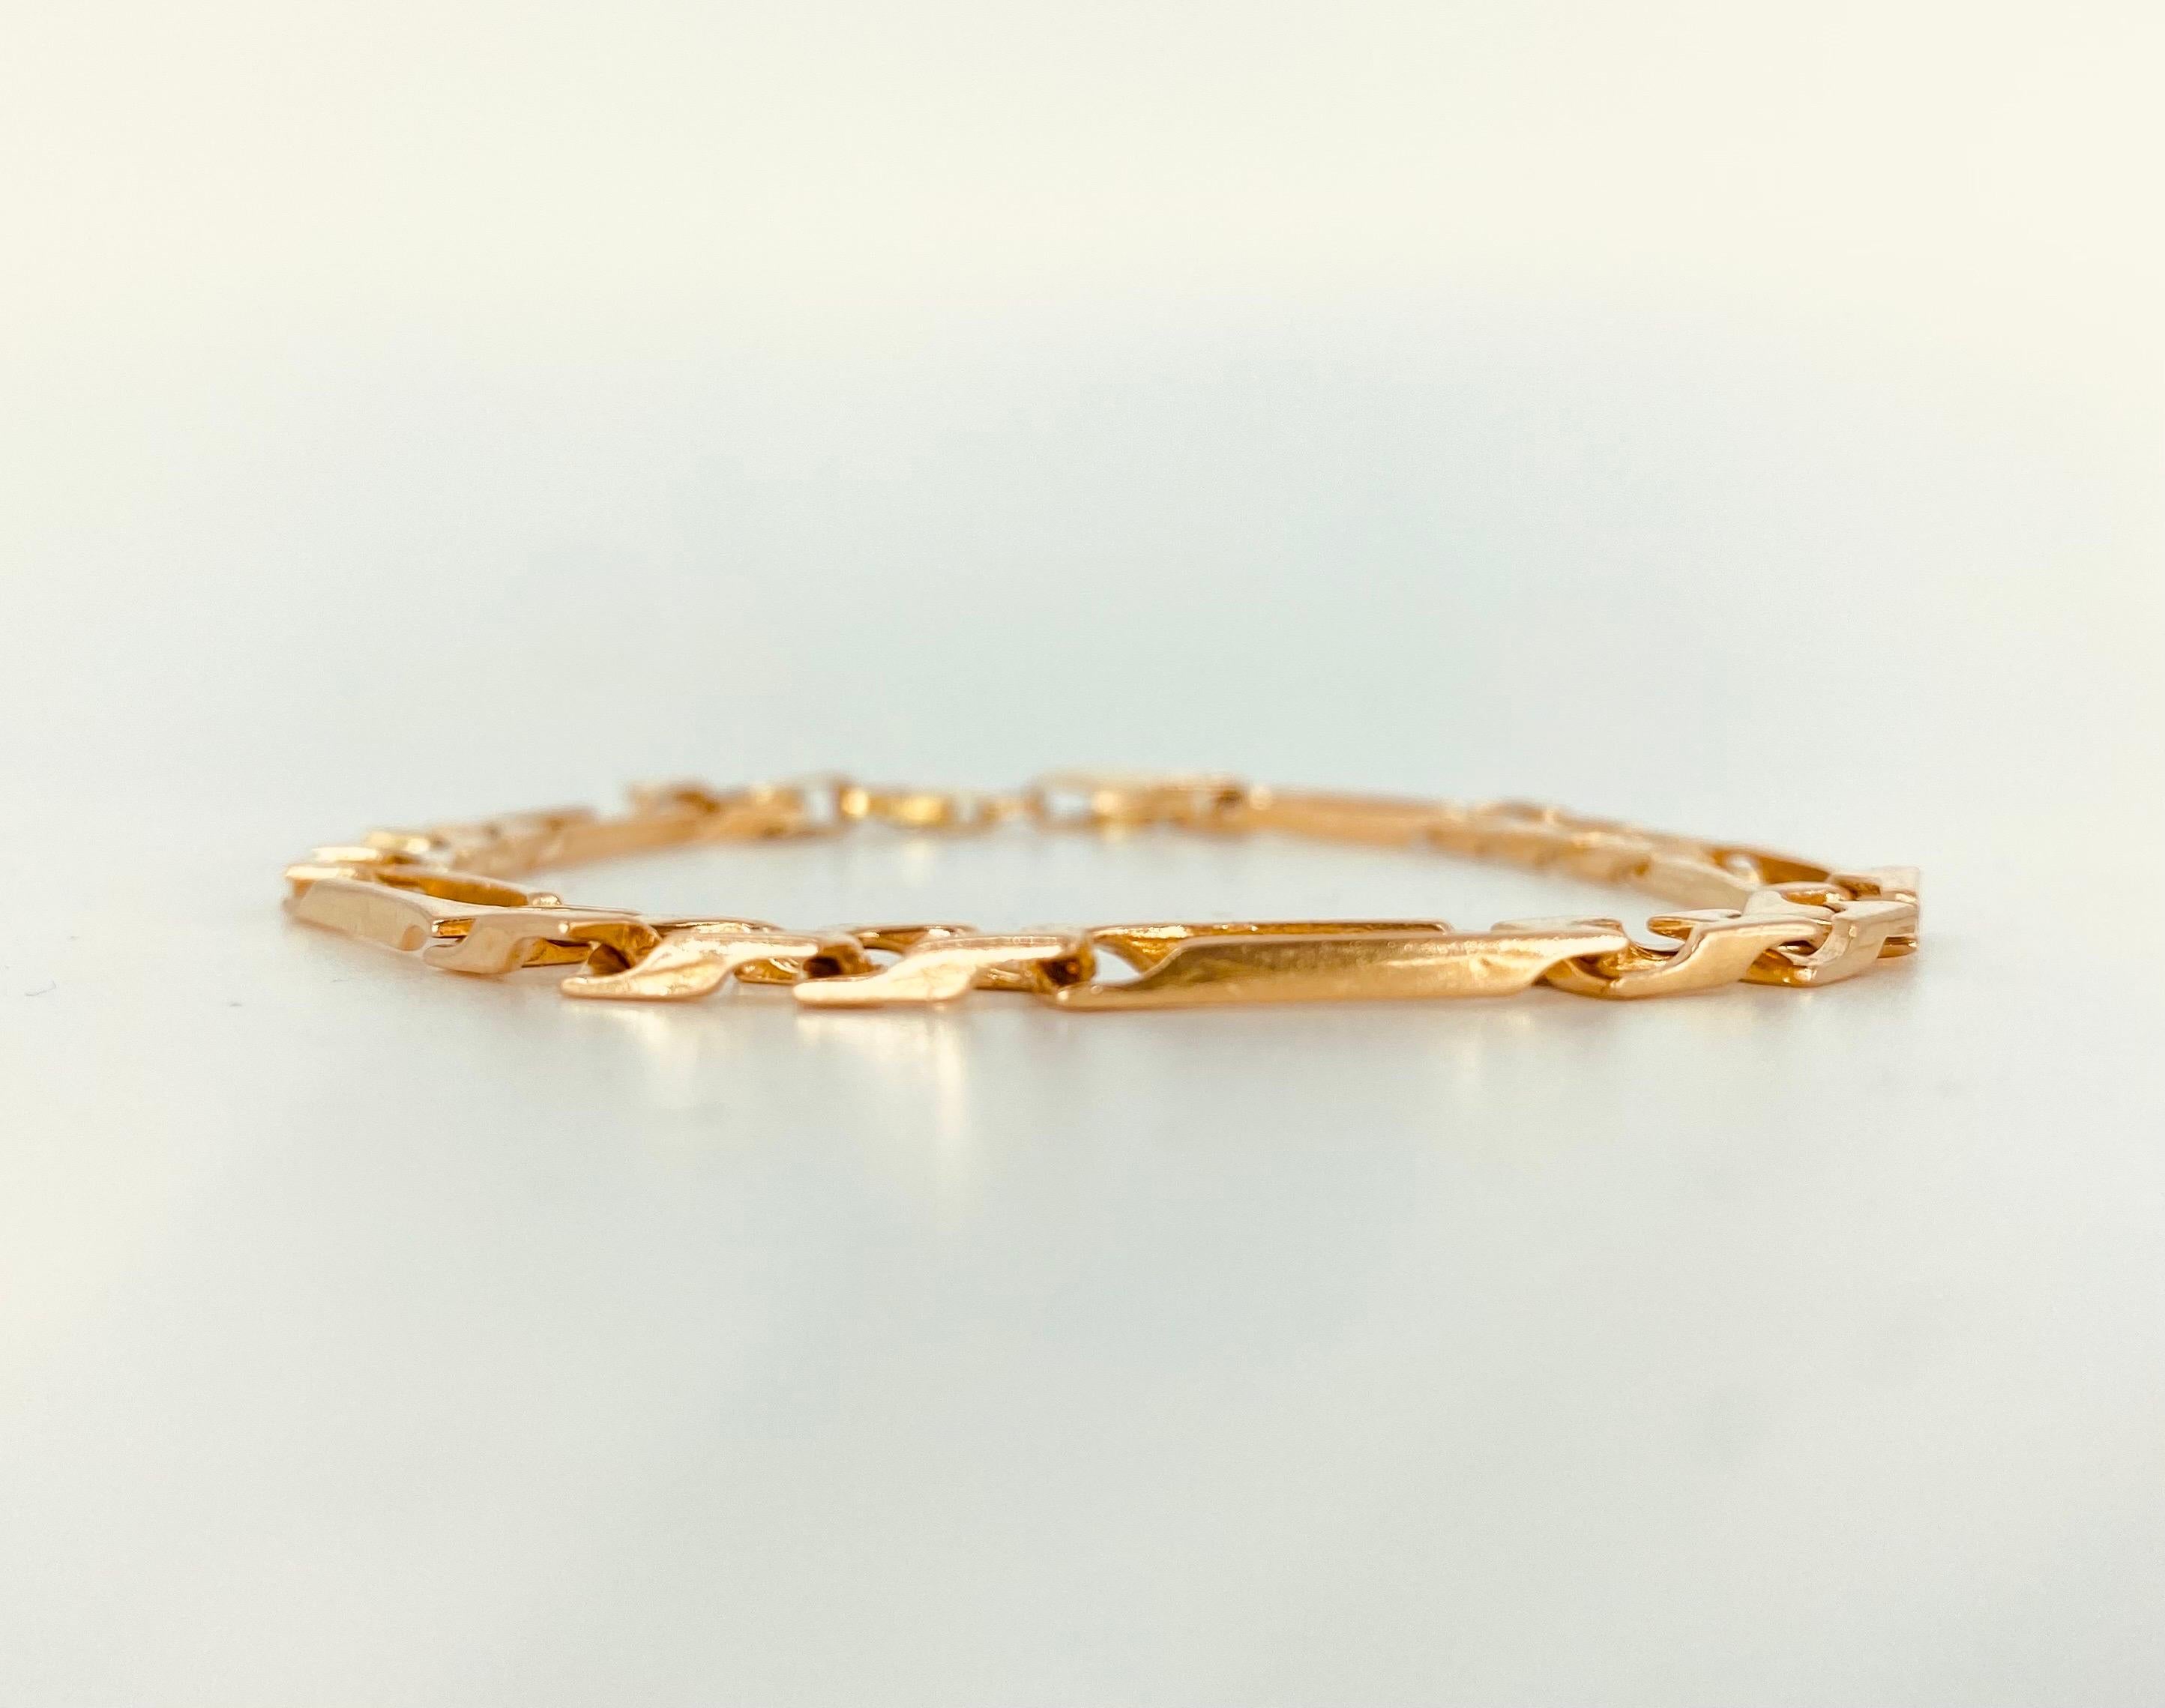 Vintage Fancy Boxed Figaro Link Bracelet 14 Gold. The bracelet measures 6.25mm in width and is 7.5 inches long. The bracelet weights 12 grams and is made of 14k gold.